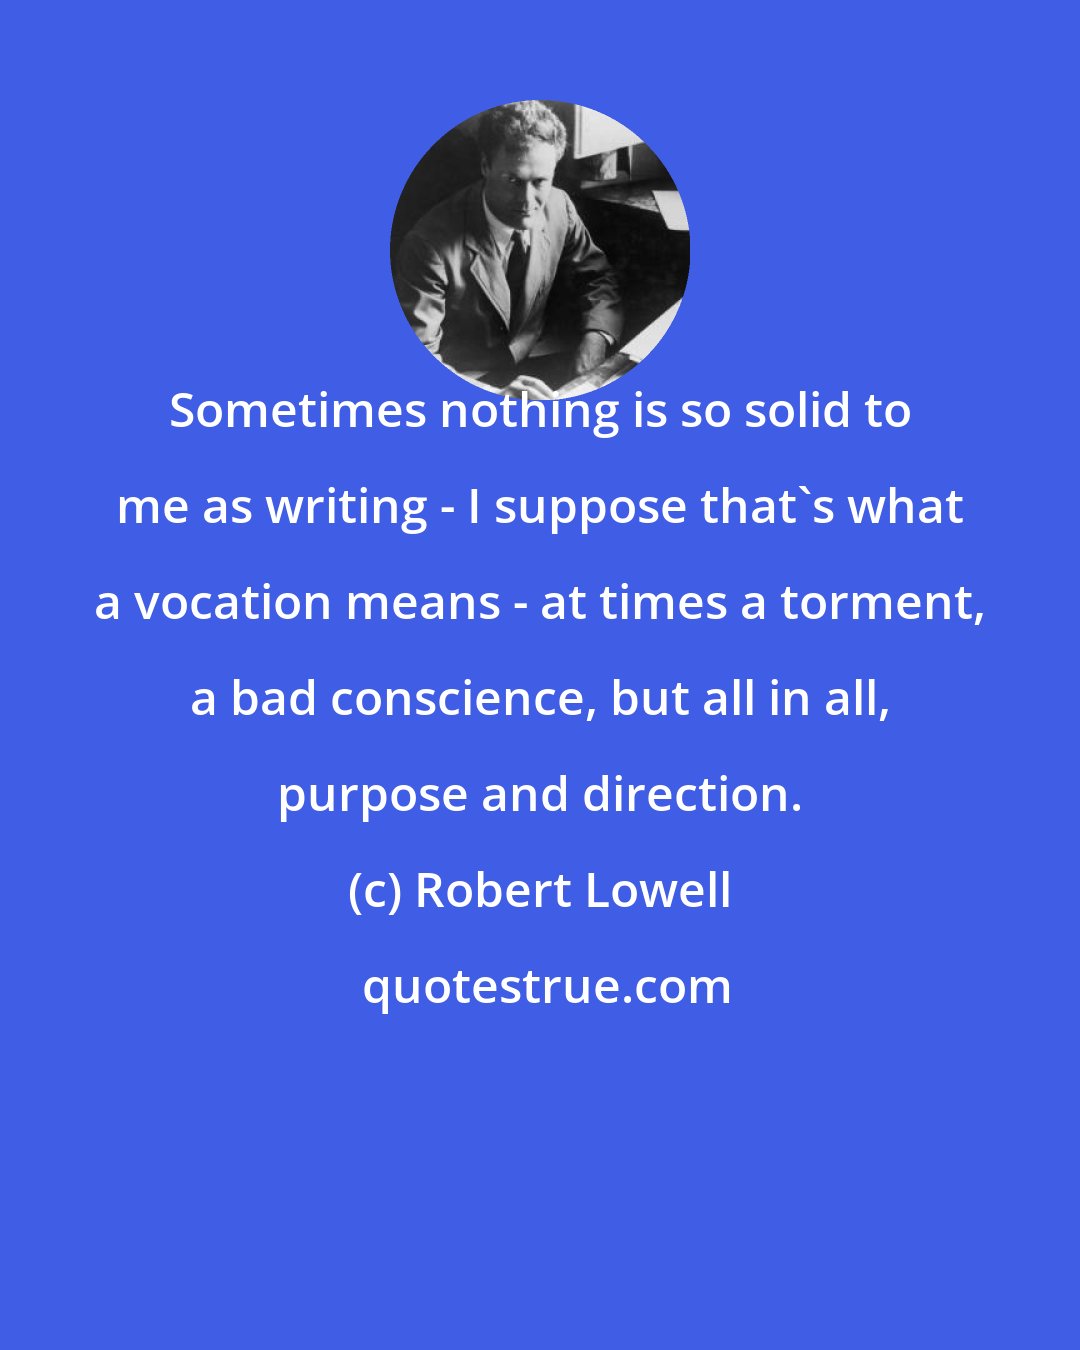 Robert Lowell: Sometimes nothing is so solid to me as writing - I suppose that's what a vocation means - at times a torment, a bad conscience, but all in all, purpose and direction.